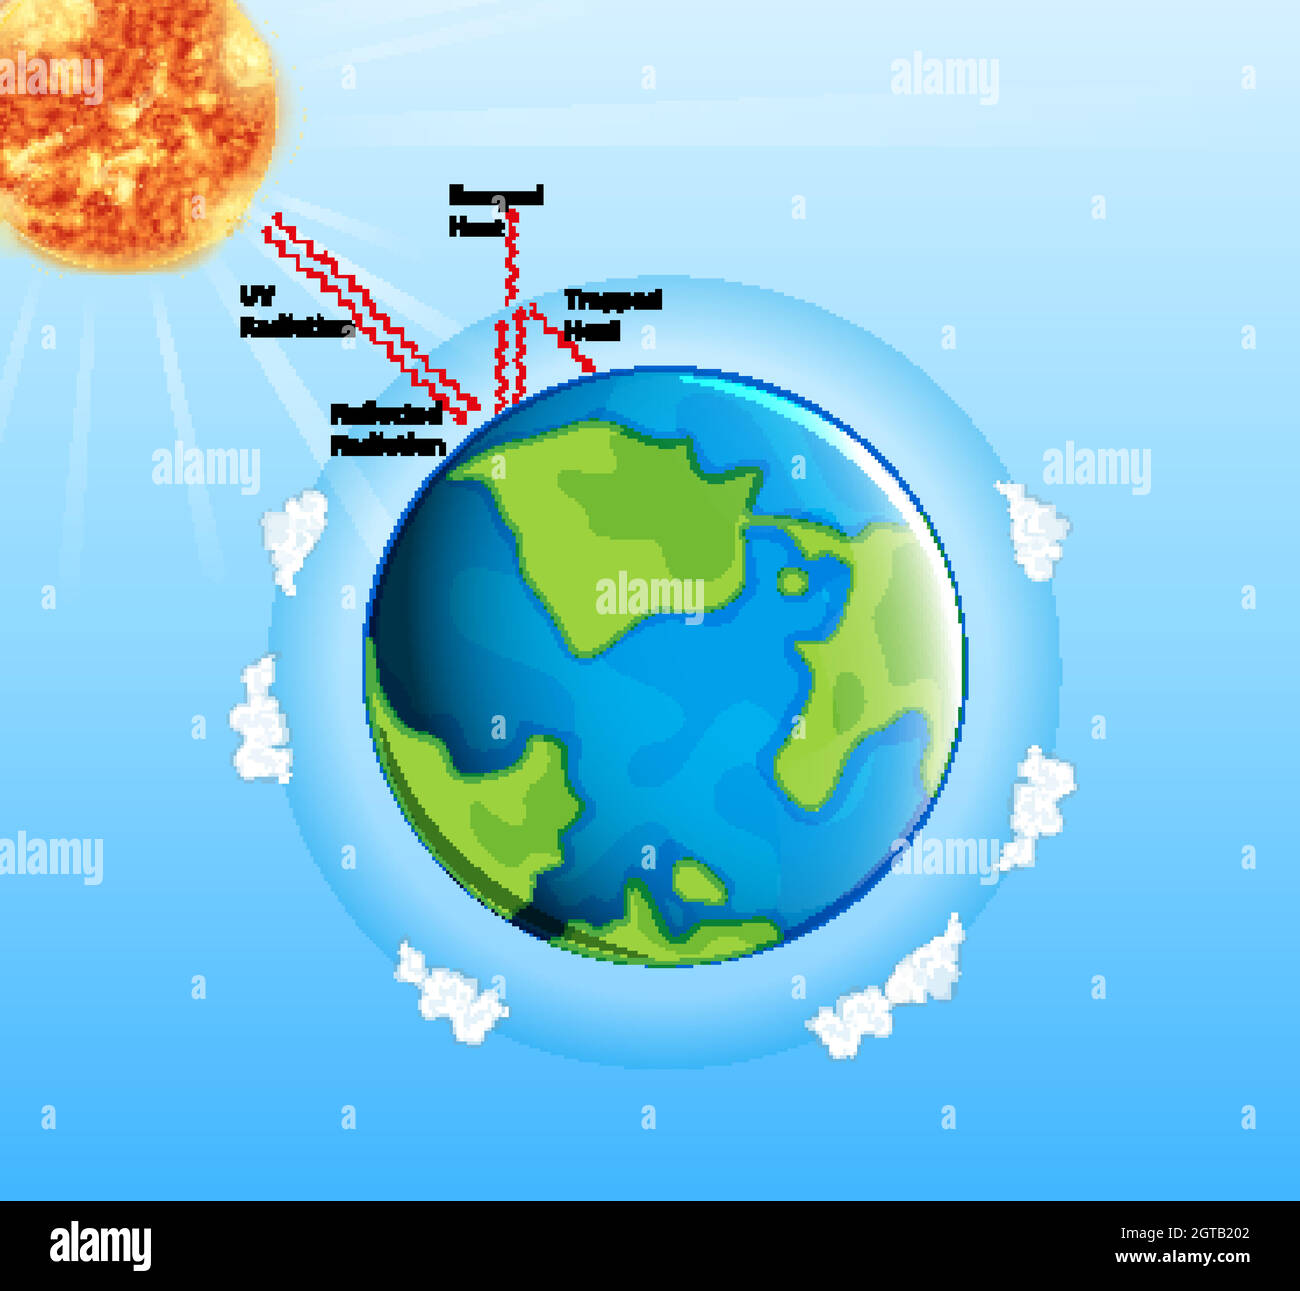 Diagram showing global warming on earth Stock Vector